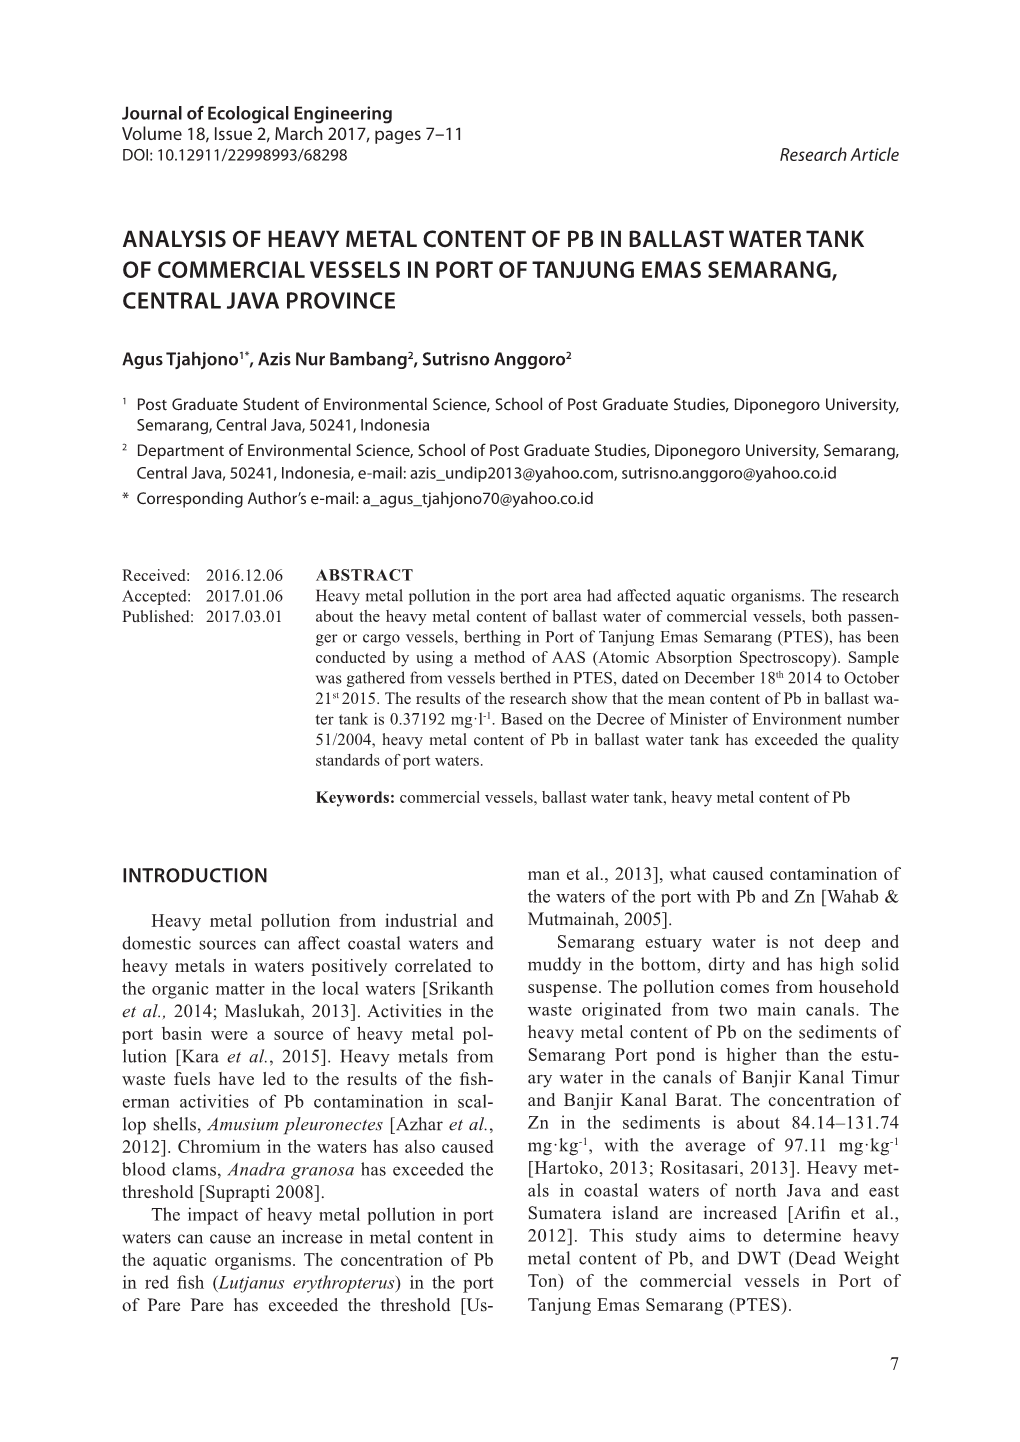 Analysis of Heavy Metal Content of Pb in Ballast Water Tank of Commercial Vessels in Port of Tanjung Emas Semarang, Central Java Province